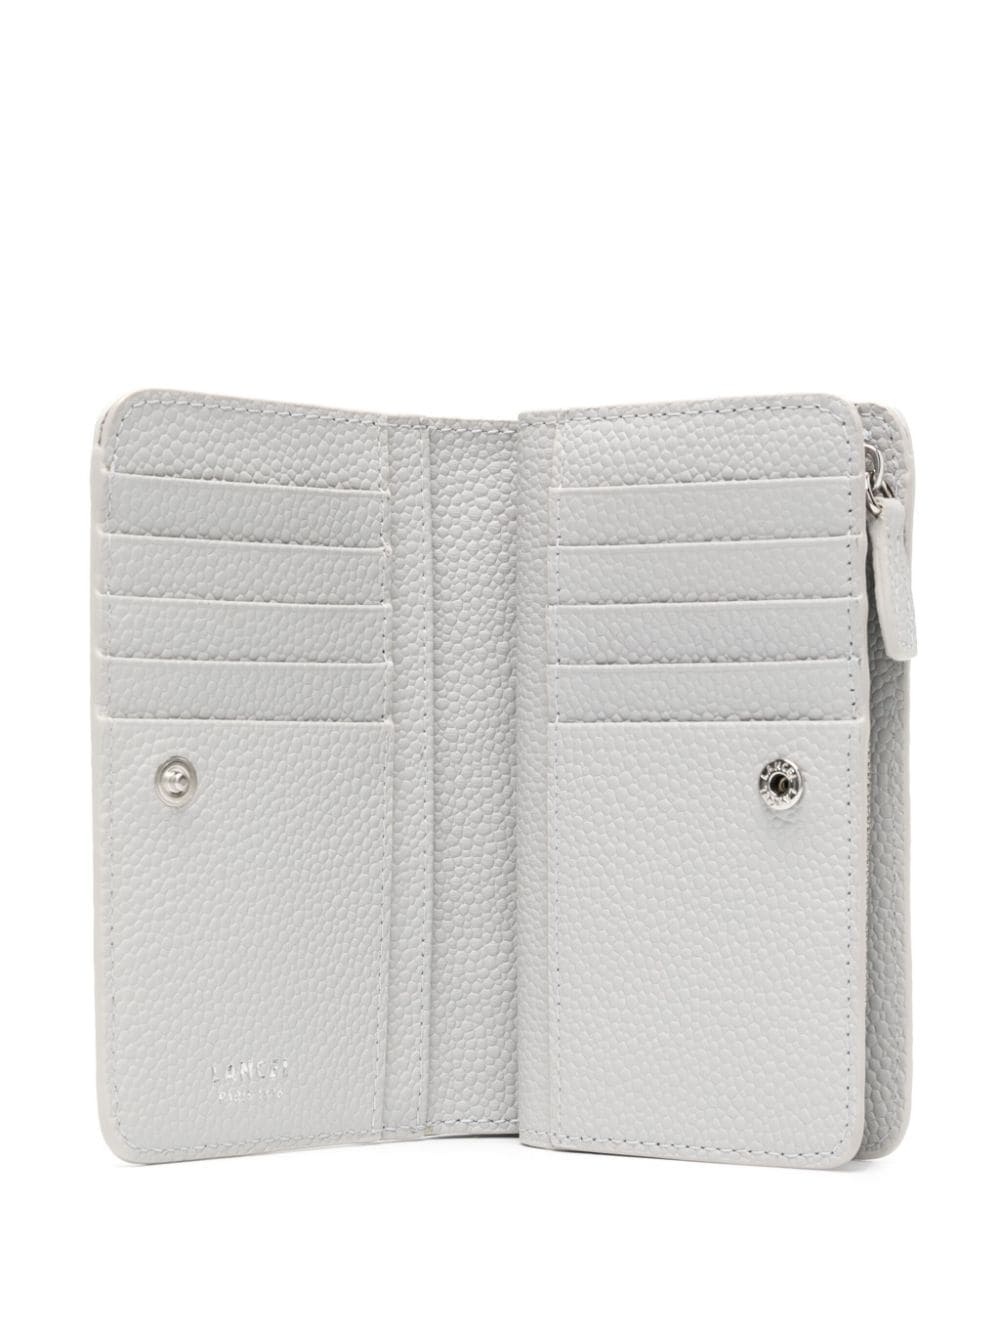 Ninon leather compact wallet - 3